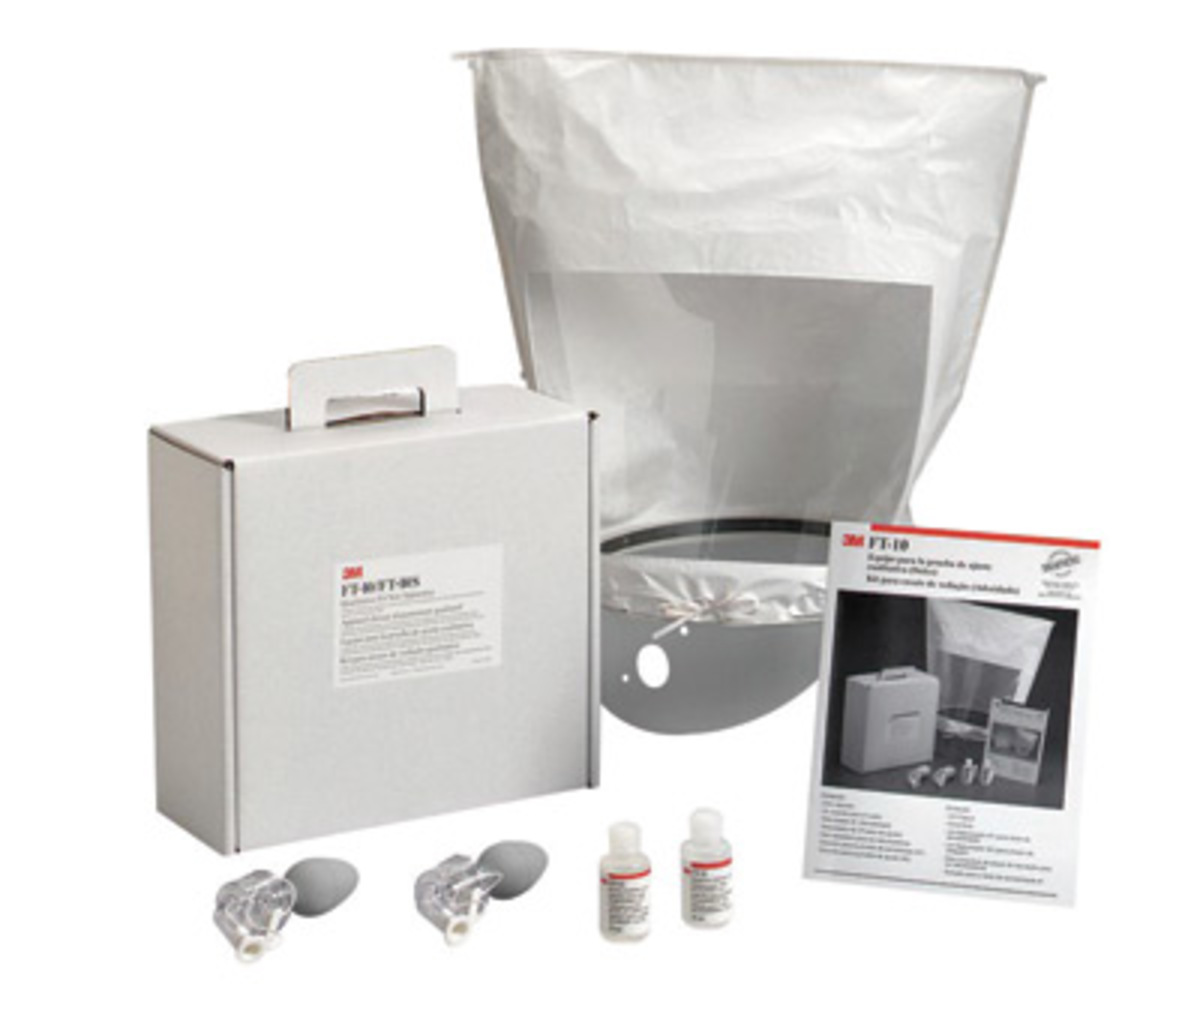 3M™ Bitter Qualitative Fit Testing Kit For 3M™ Any Particulate or Gas/Vapor Respirator With Particulate Prefilter (Availability